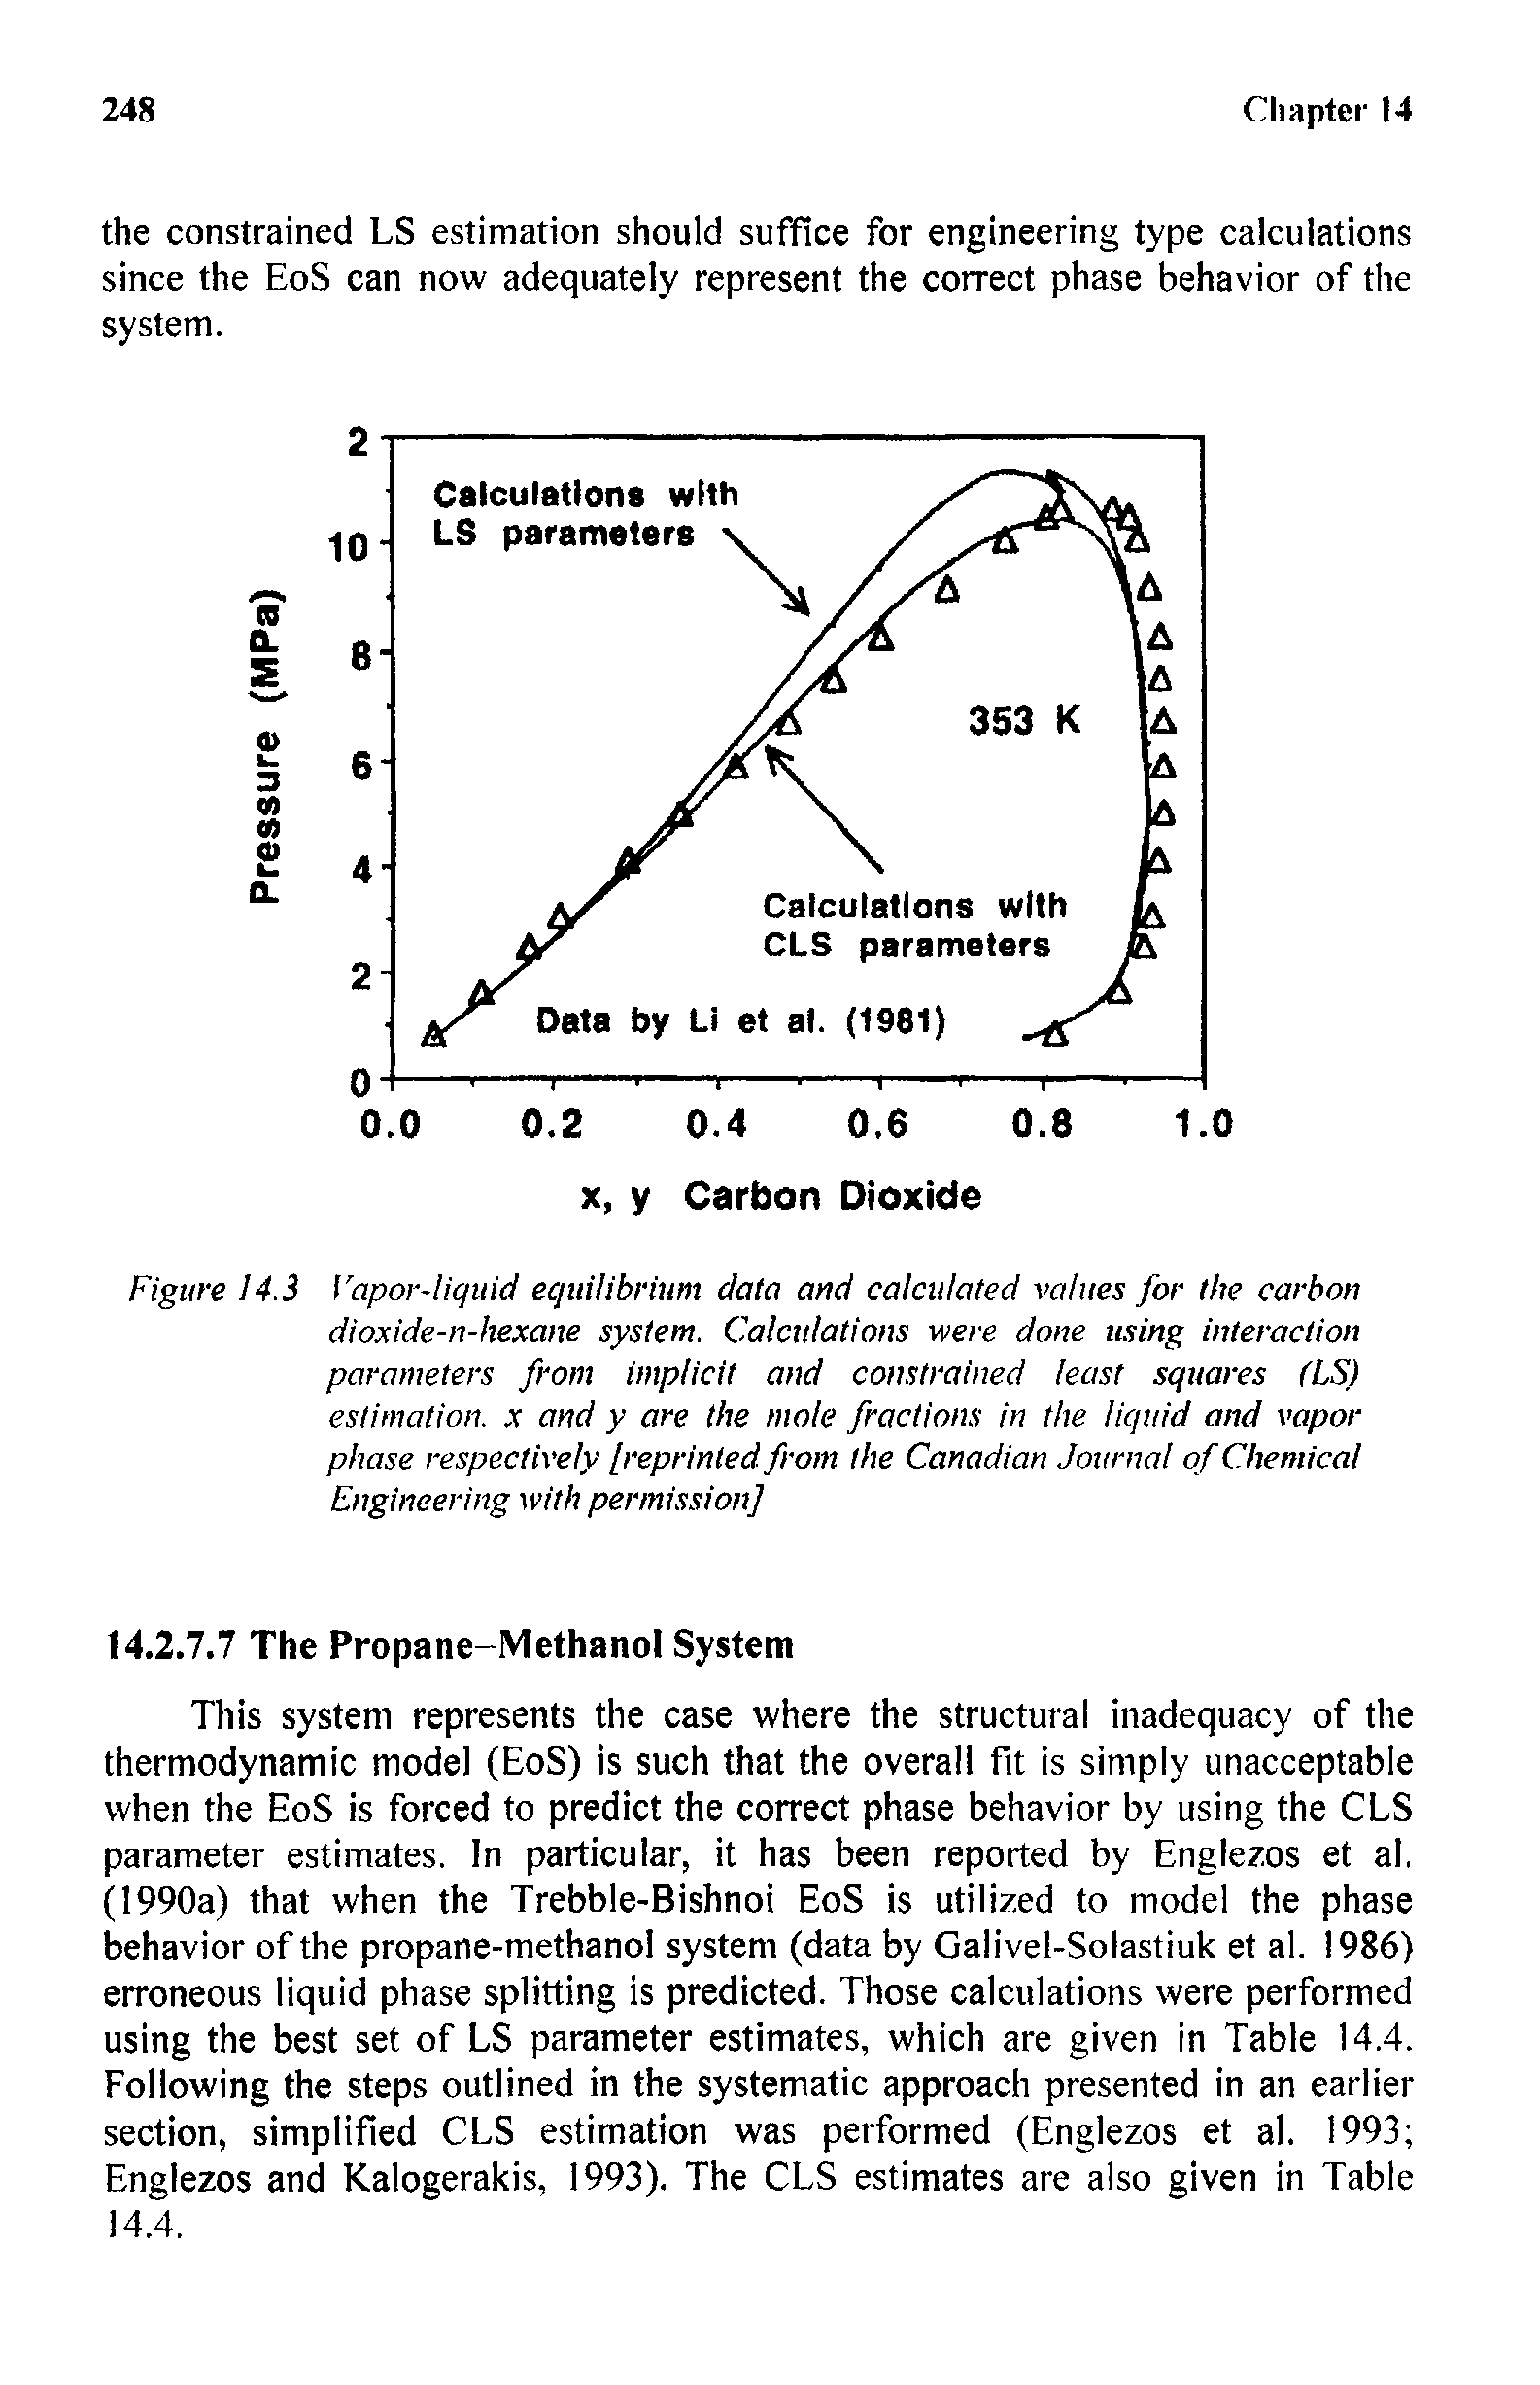 Figure 14.3 Vapor-liquid equilibrium data and calculated values for the carbon dioxide-n-hexane system. Calculations were done using interaction parameters from implicit and constrained least squares (LS) estimation, x and y are the mote fractions in the liquid and vapor phase respectively [reprinted from the Canadian Journal of Chemical Engineering with permission]...